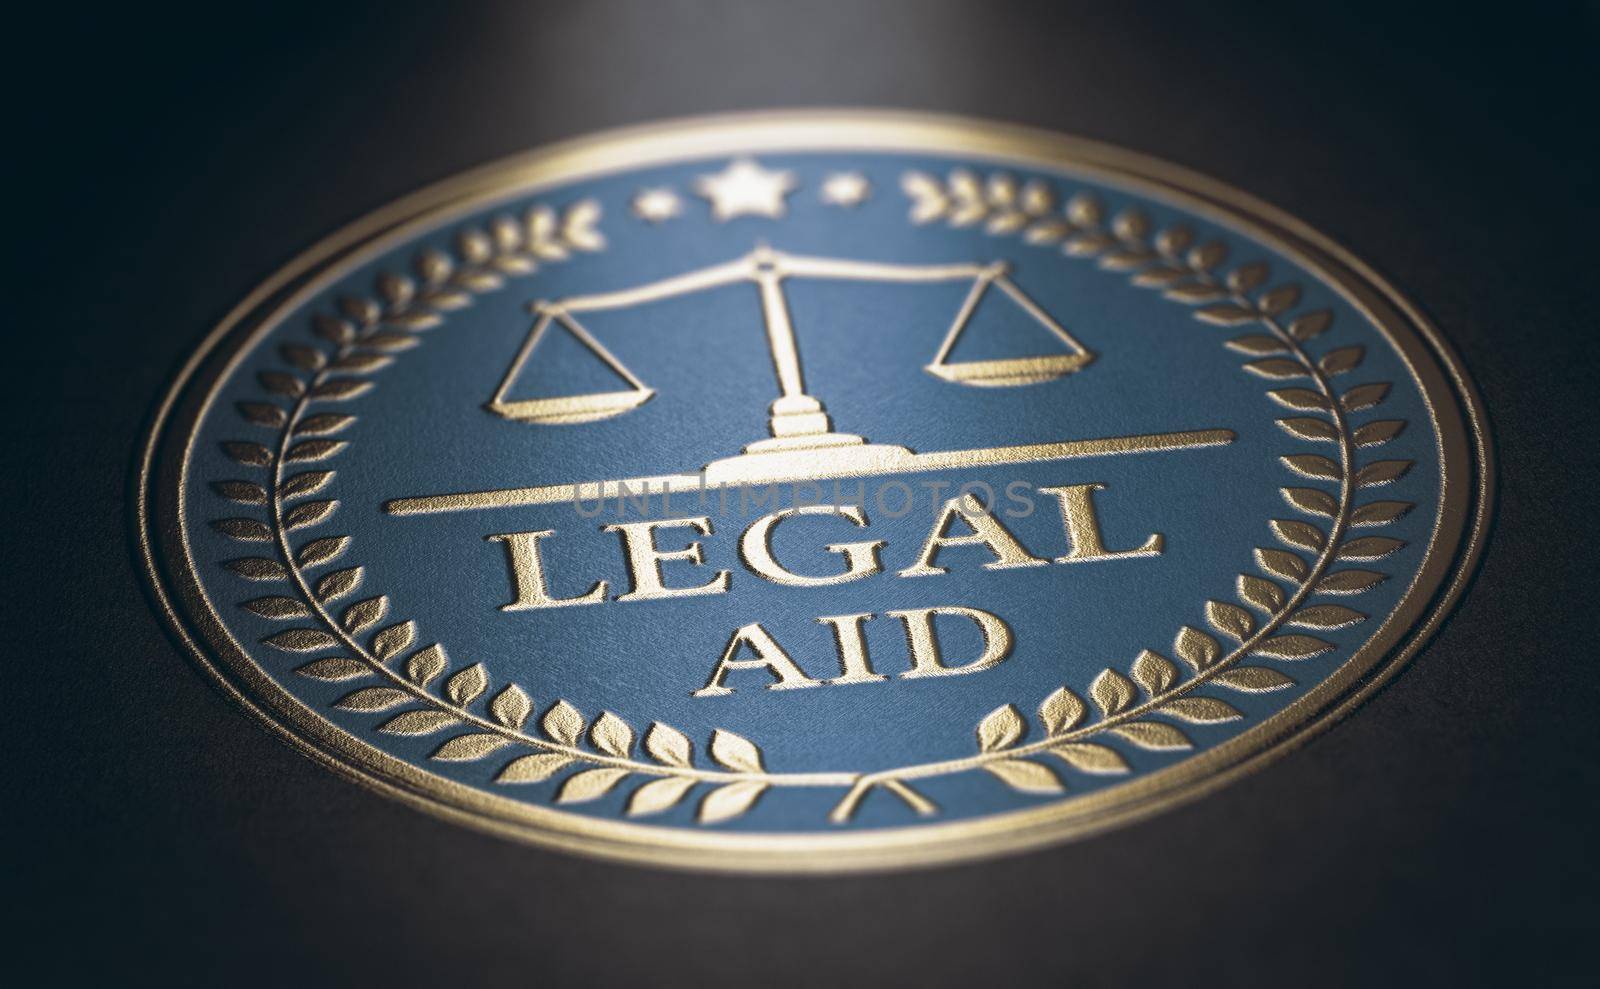 Legal aid symbol. by Olivier-Le-Moal